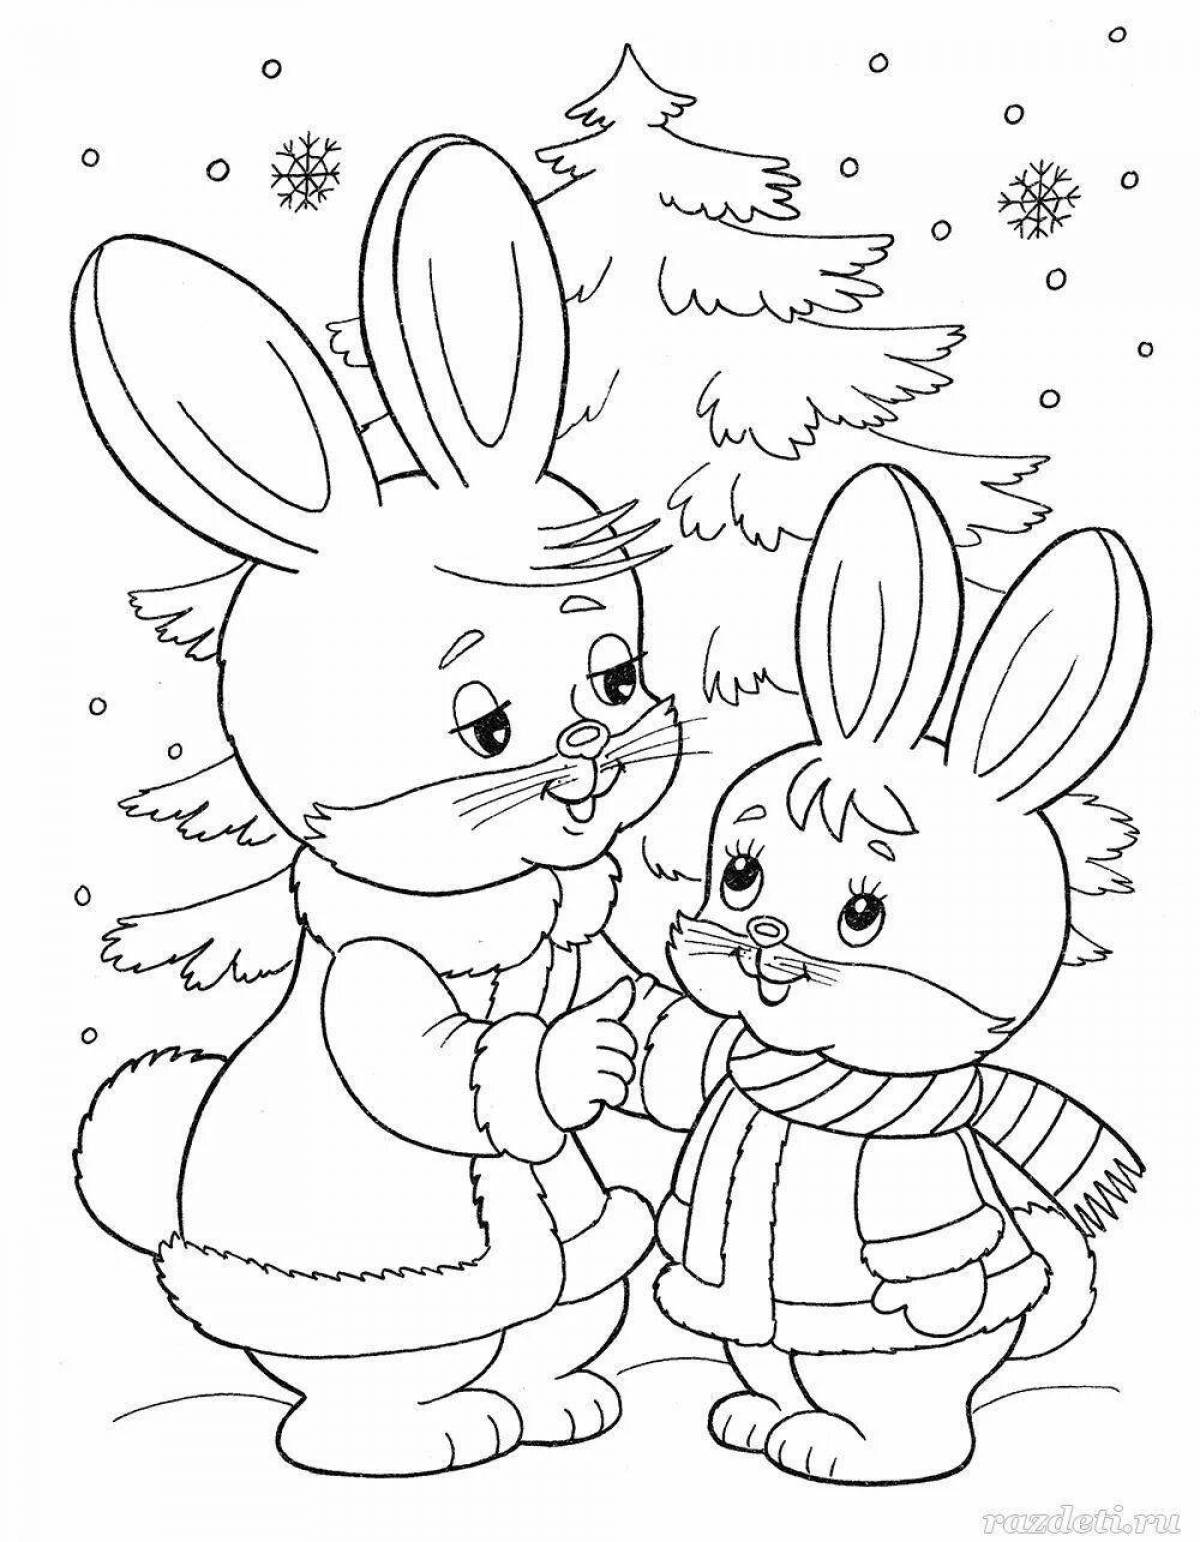 A nice Christmas coloring book for kids 3-4 years old